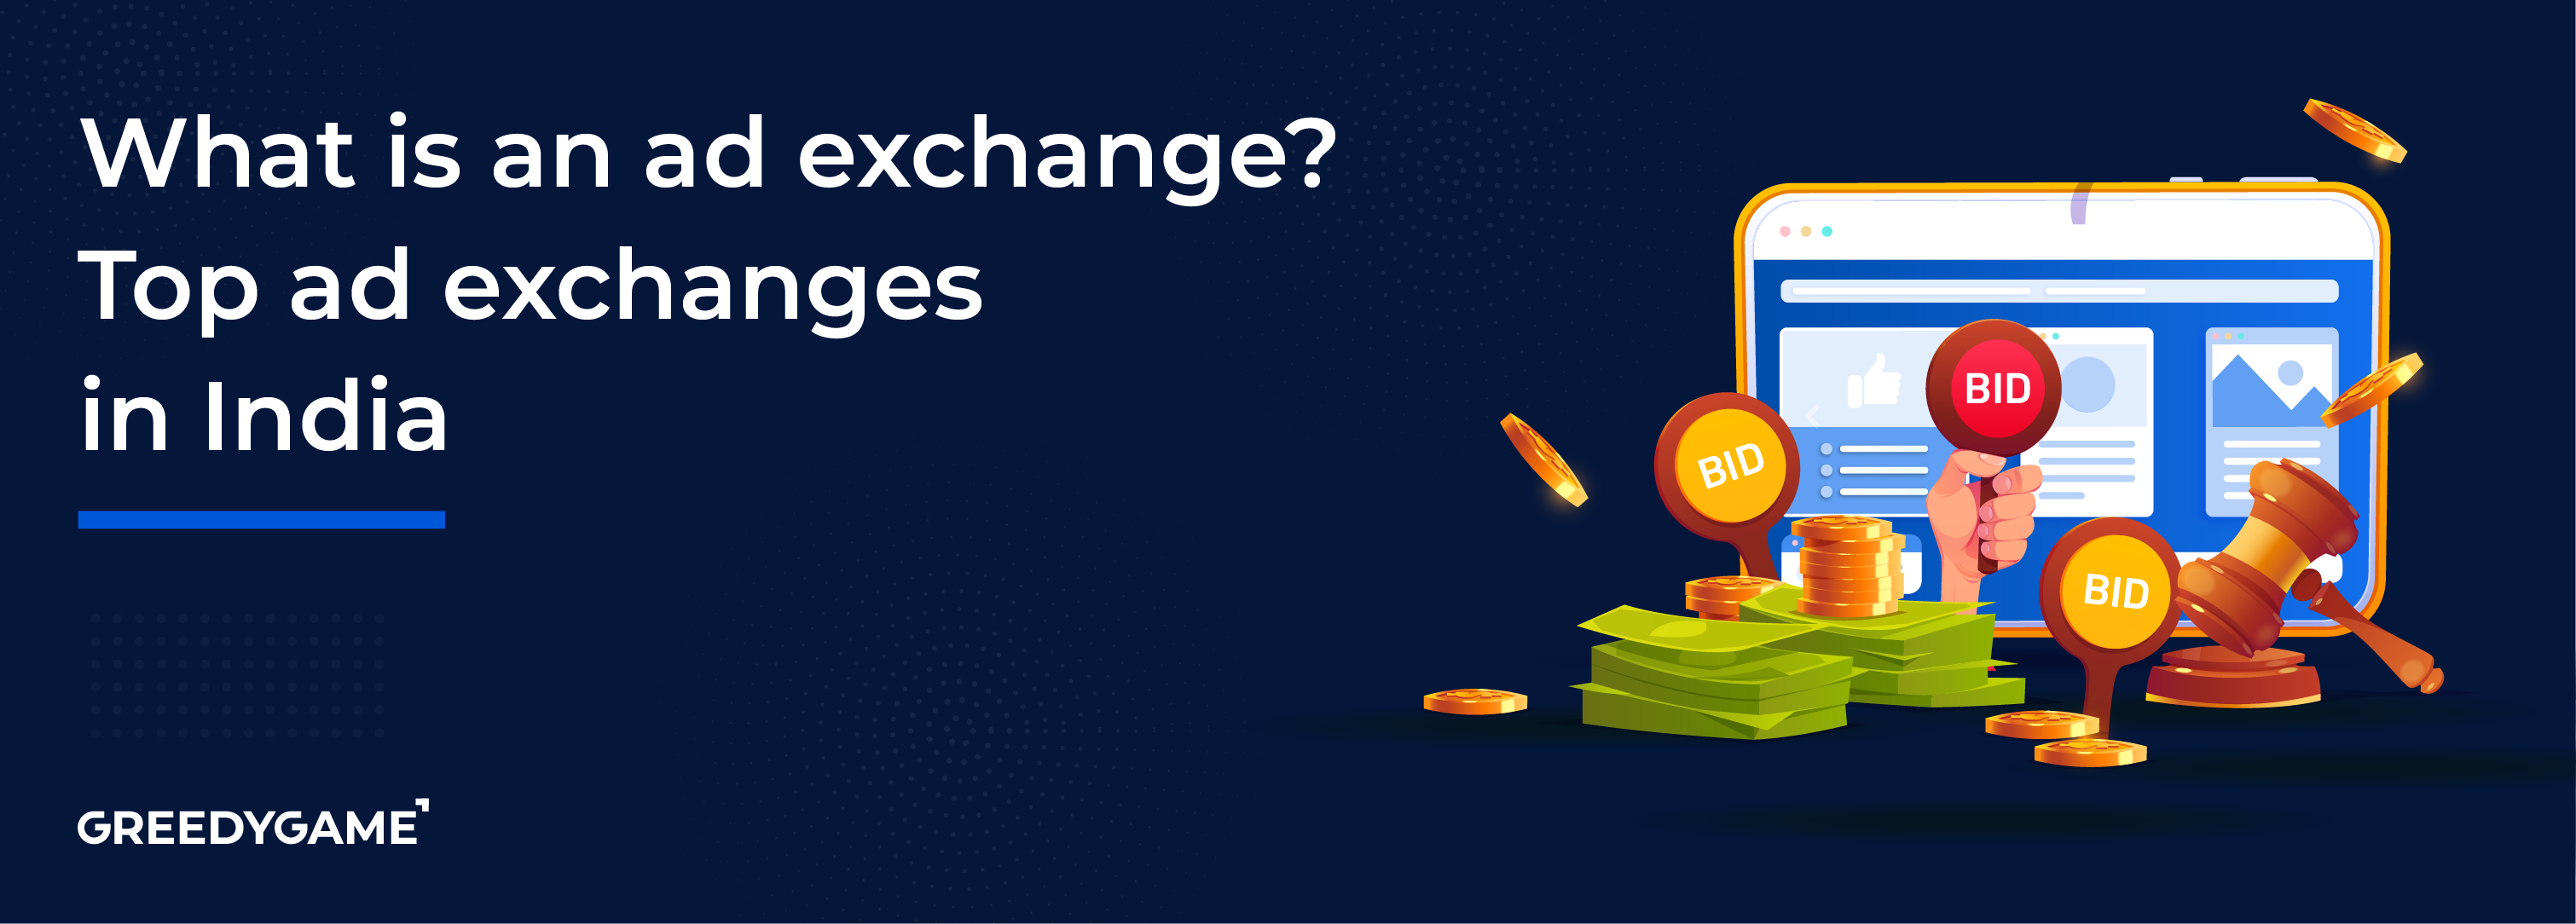 What is an ad exchange platform? Top ad exchanges in India